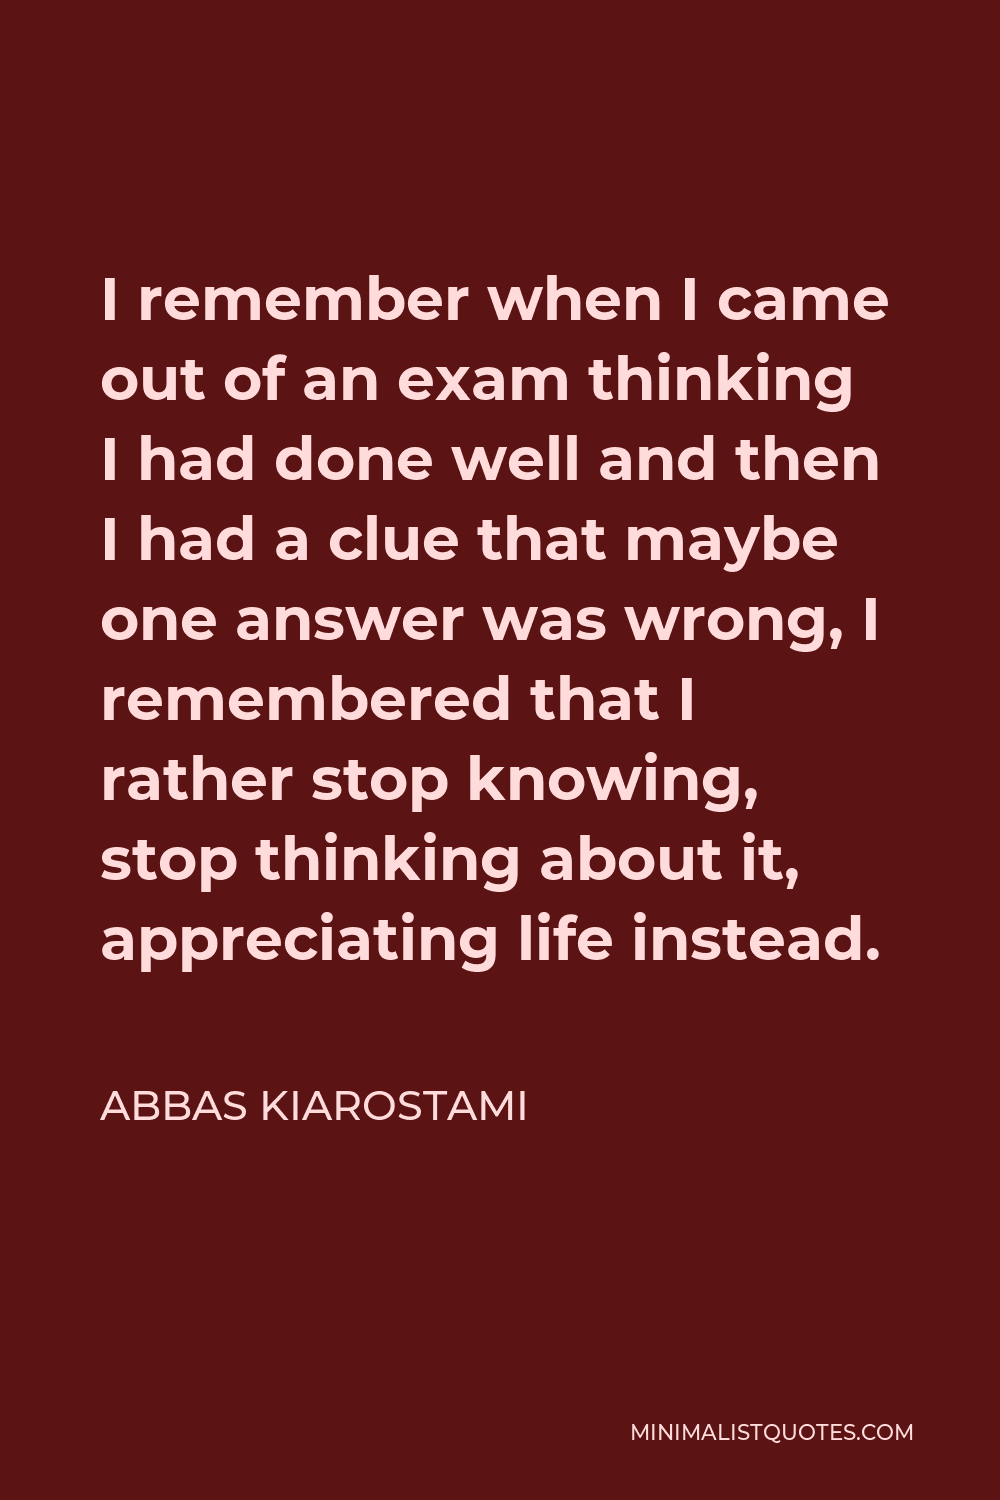 Abbas Kiarostami Quote - I remember when I came out of an exam thinking I had done well and then I had a clue that maybe one answer was wrong, I remembered that I rather stop knowing, stop thinking about it, appreciating life instead.